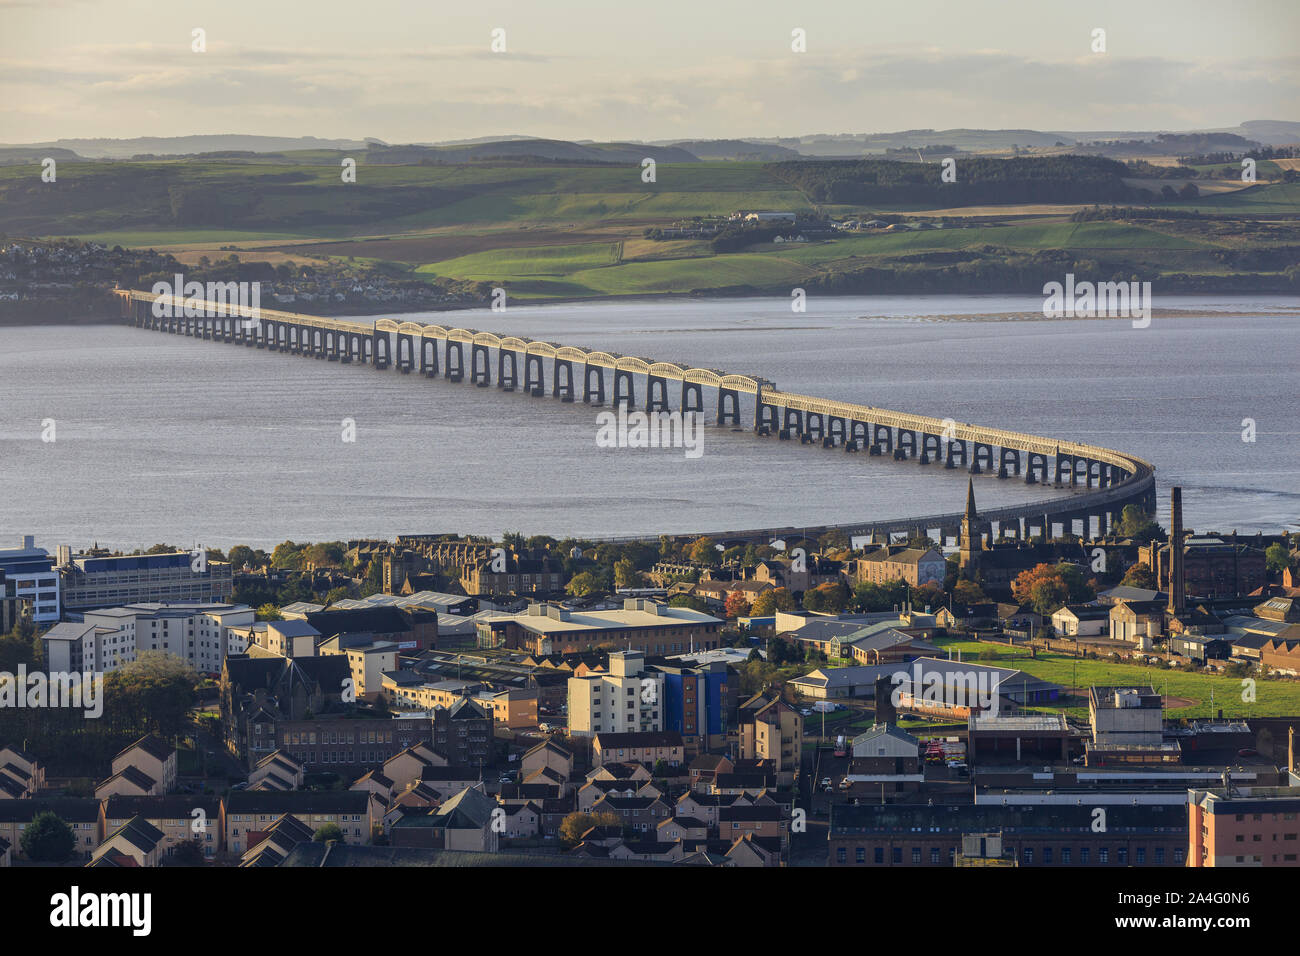 The Tay railway bridge spanning the Firth of Tay at Dundee. Stock Photo